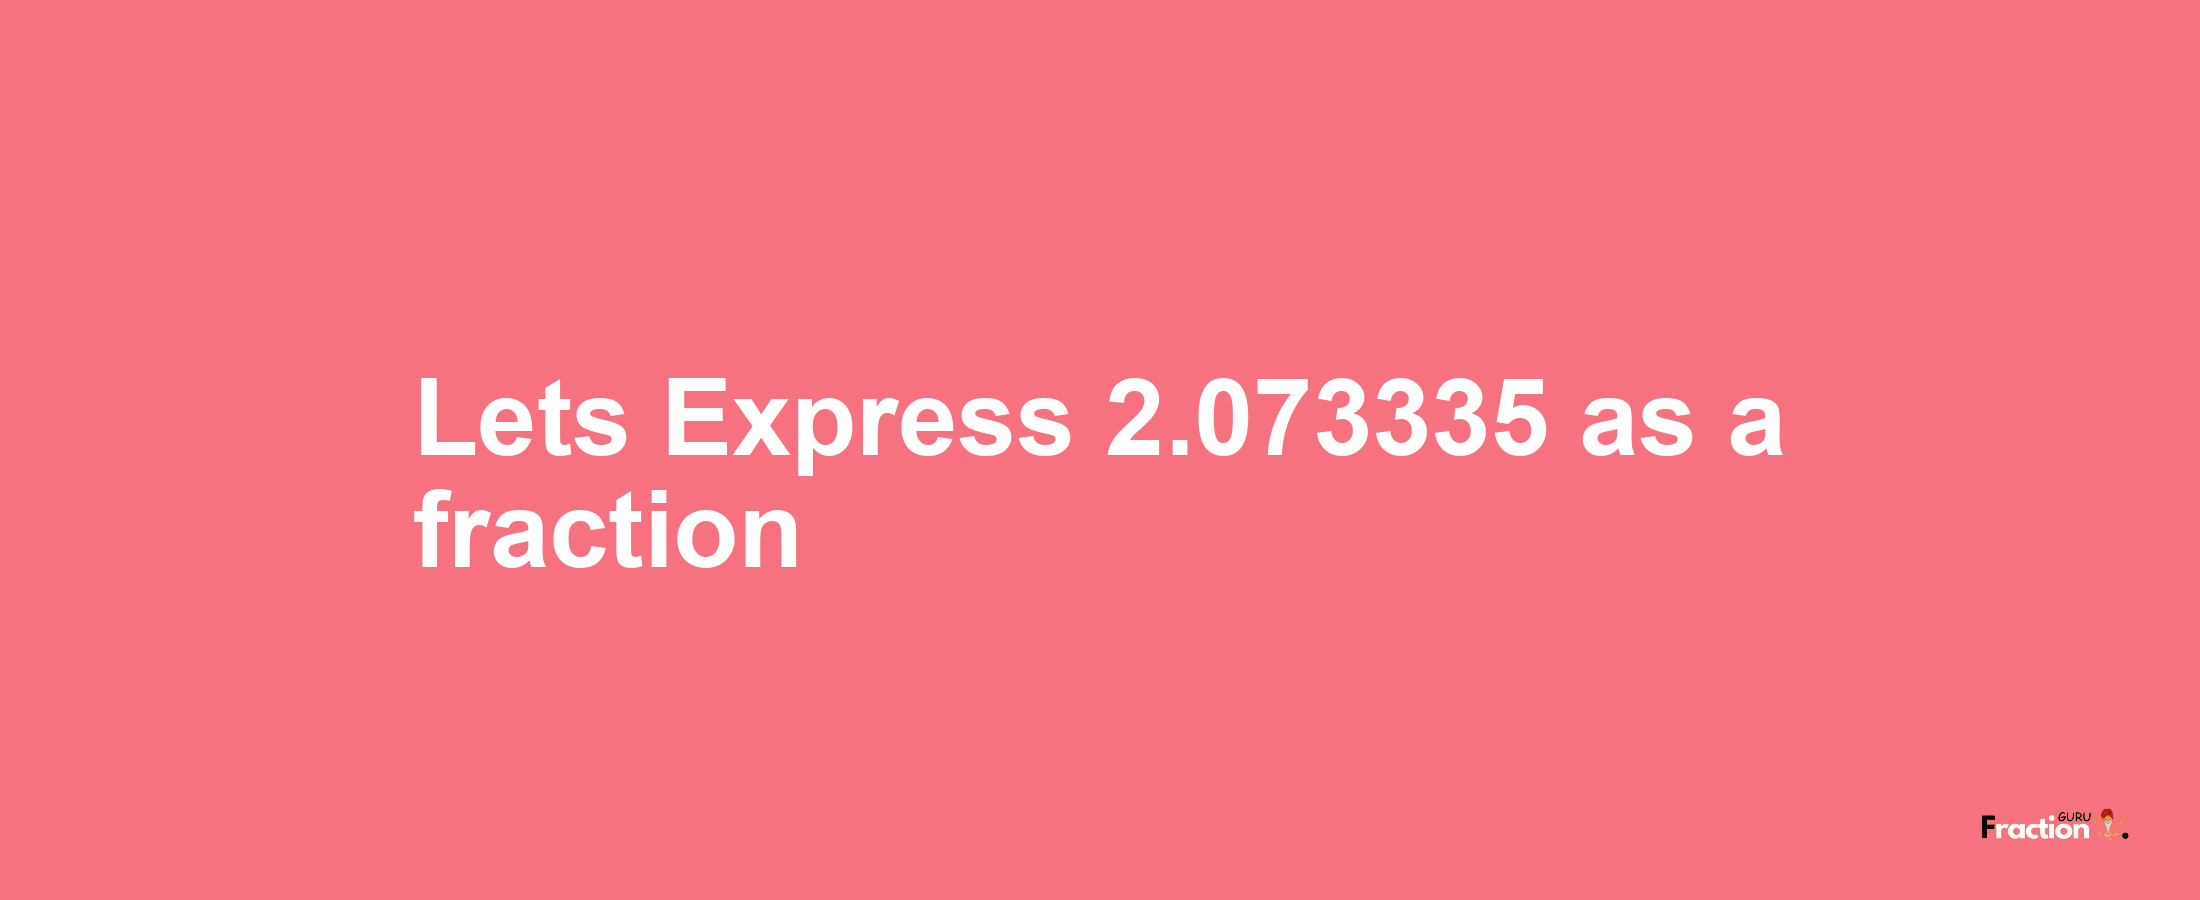 Lets Express 2.073335 as afraction